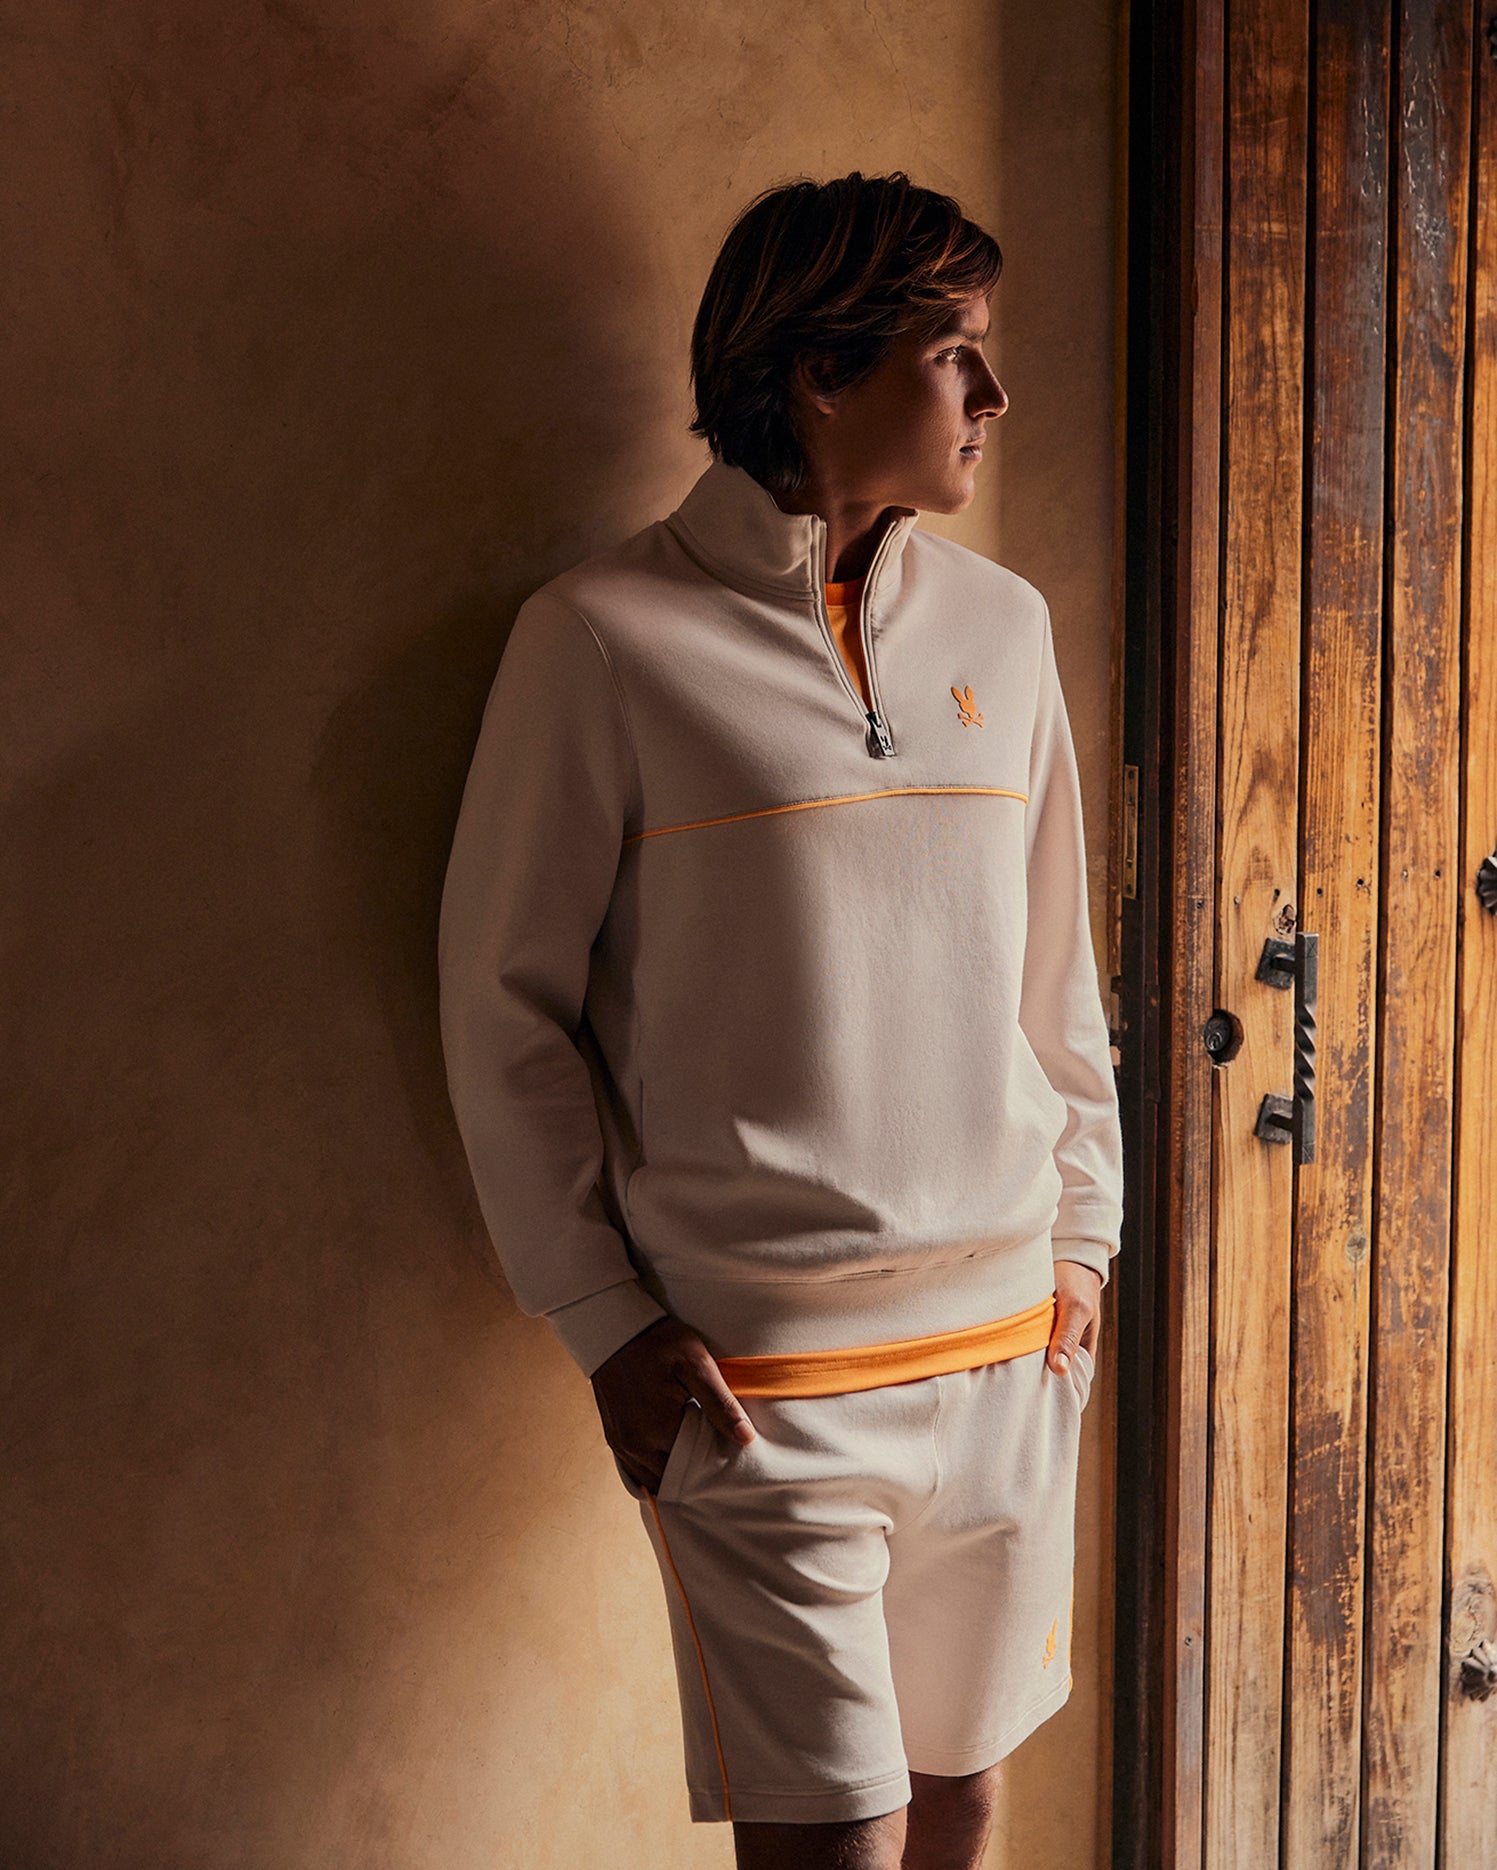 A person with short hair stands indoors, leaning against a beige wall near a wooden door. They are wearing a Psycho Bunny MENS LEON HALF ZIP SWEATSHIRT - B6S204B200 with orange accents and matching beige shorts with orange trim, hands in pockets, looking to the side.